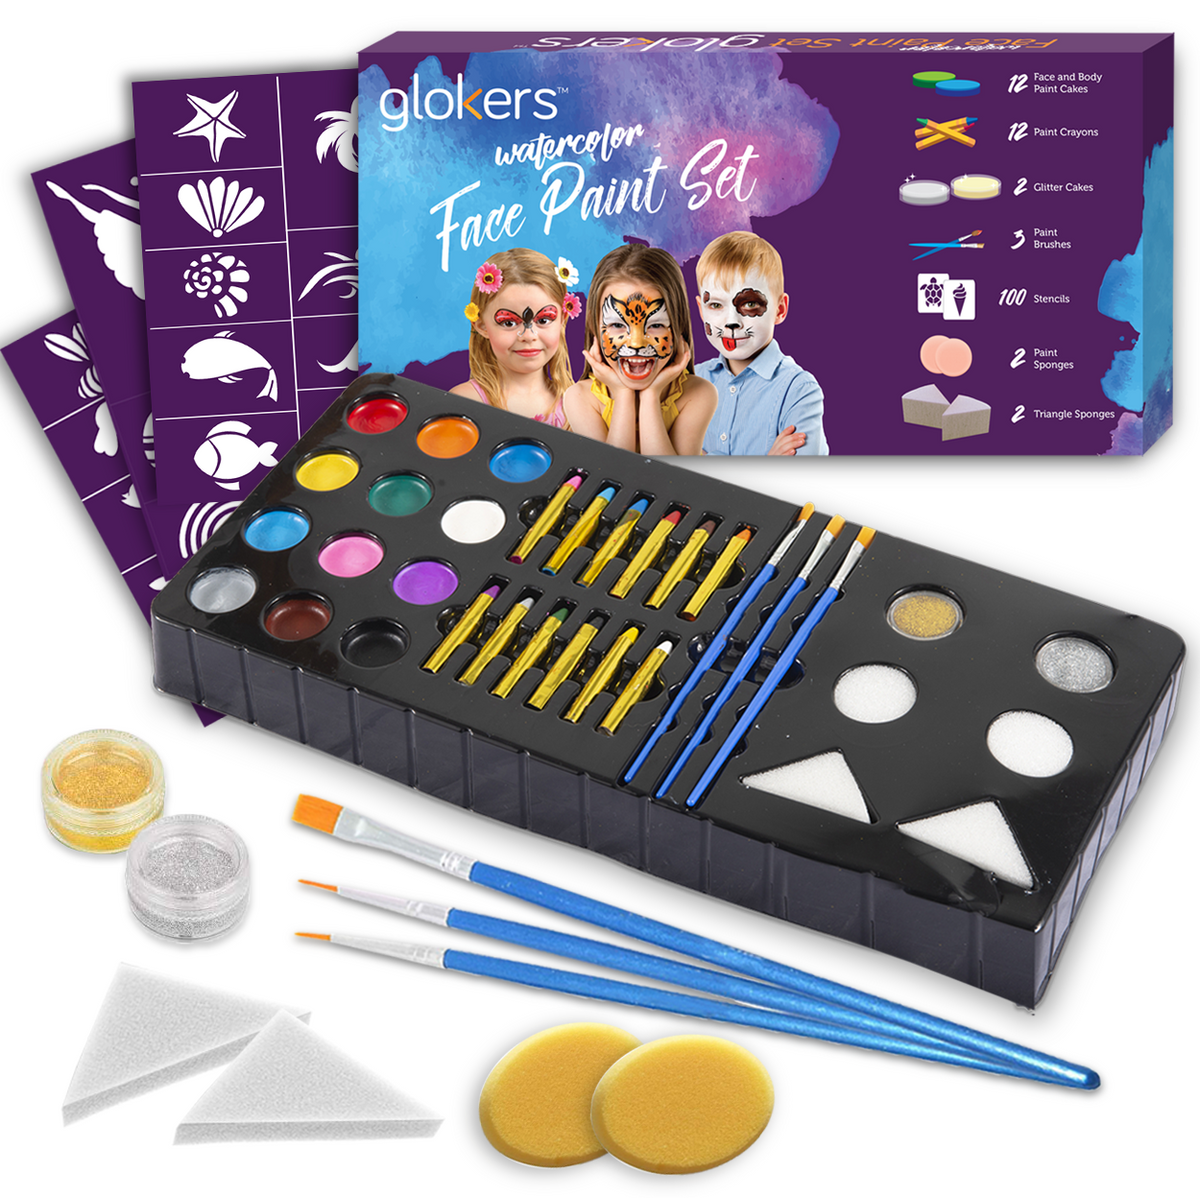 Watercolor Paint Set 30 Colors Set Professional Face Paint Kit with 1 Brush  & Non Toxic Based Face and Body Painting Makeup Palette Hypoallergenic  Facepaints for Costume Party Festival A 